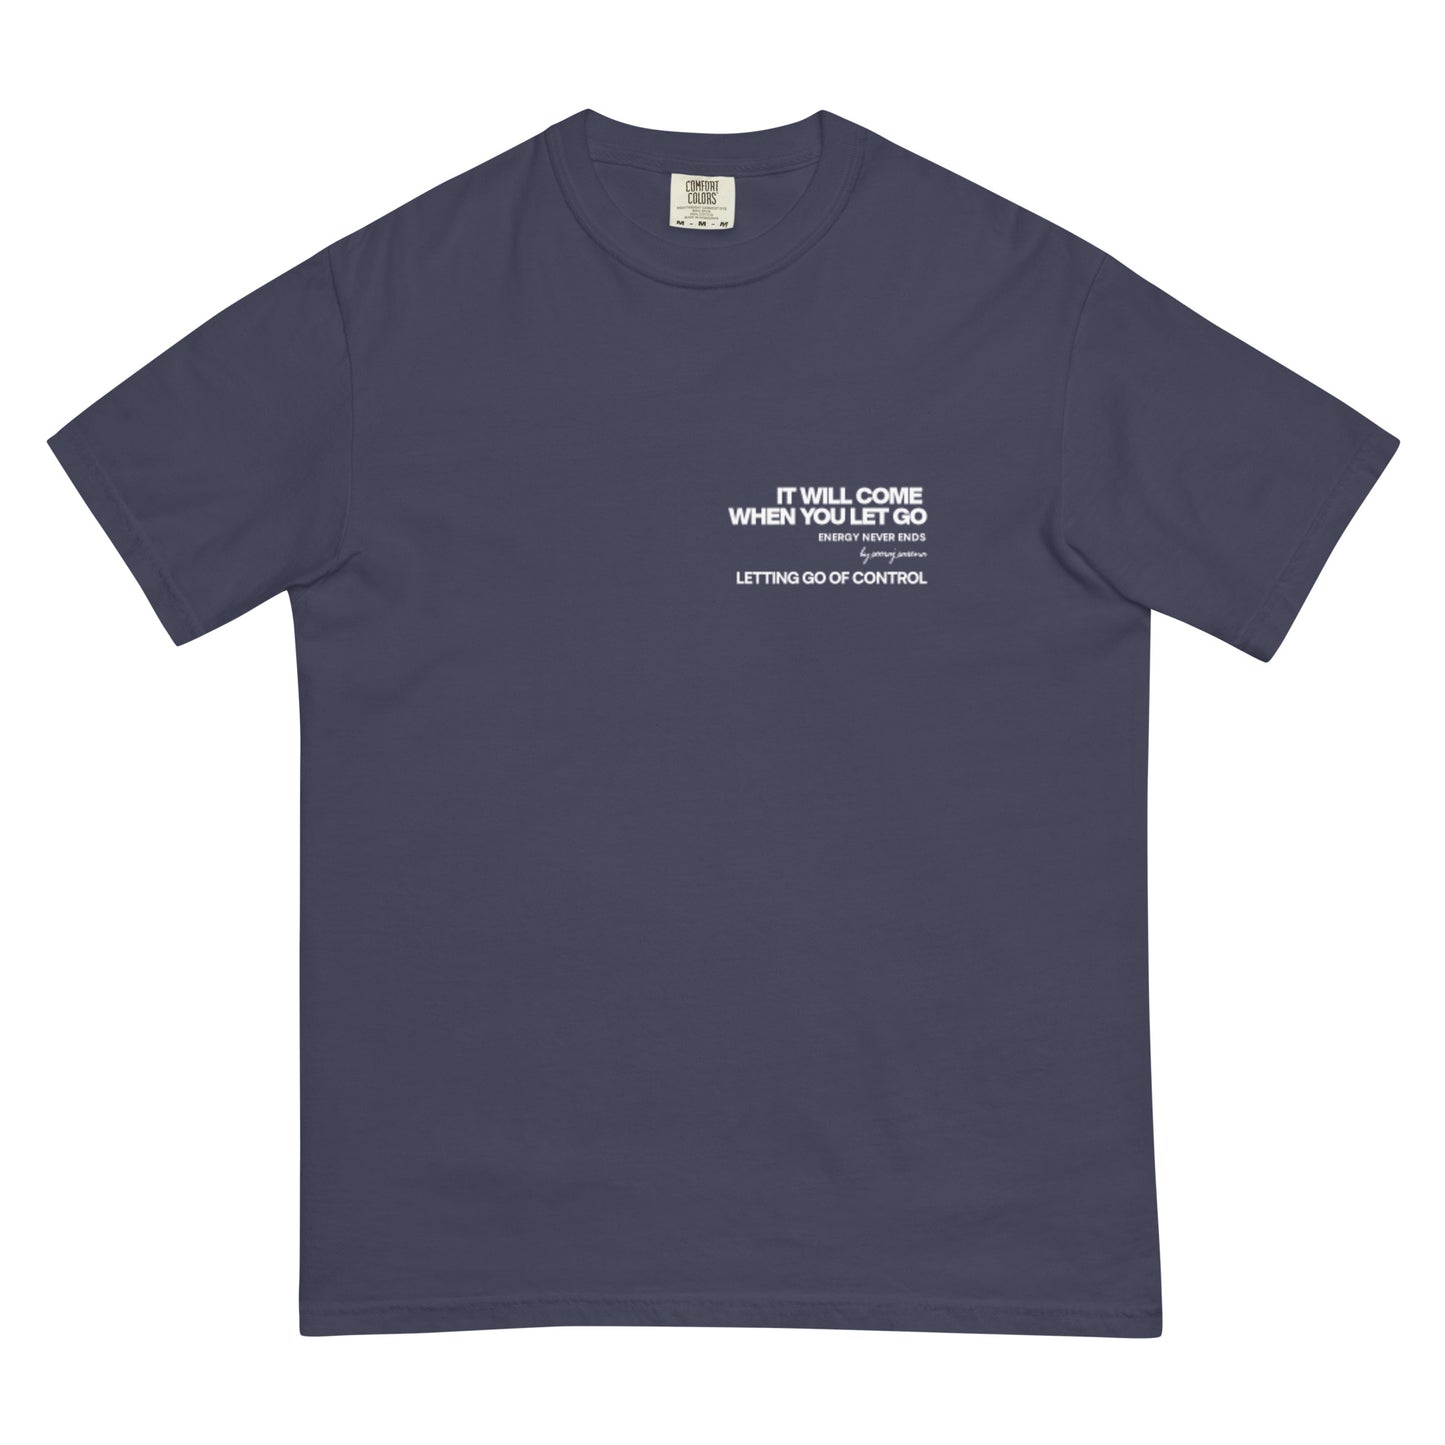 LETTING GO OF CONTROL - VOL. 1 (T-SHIRT) NAVY BLUE